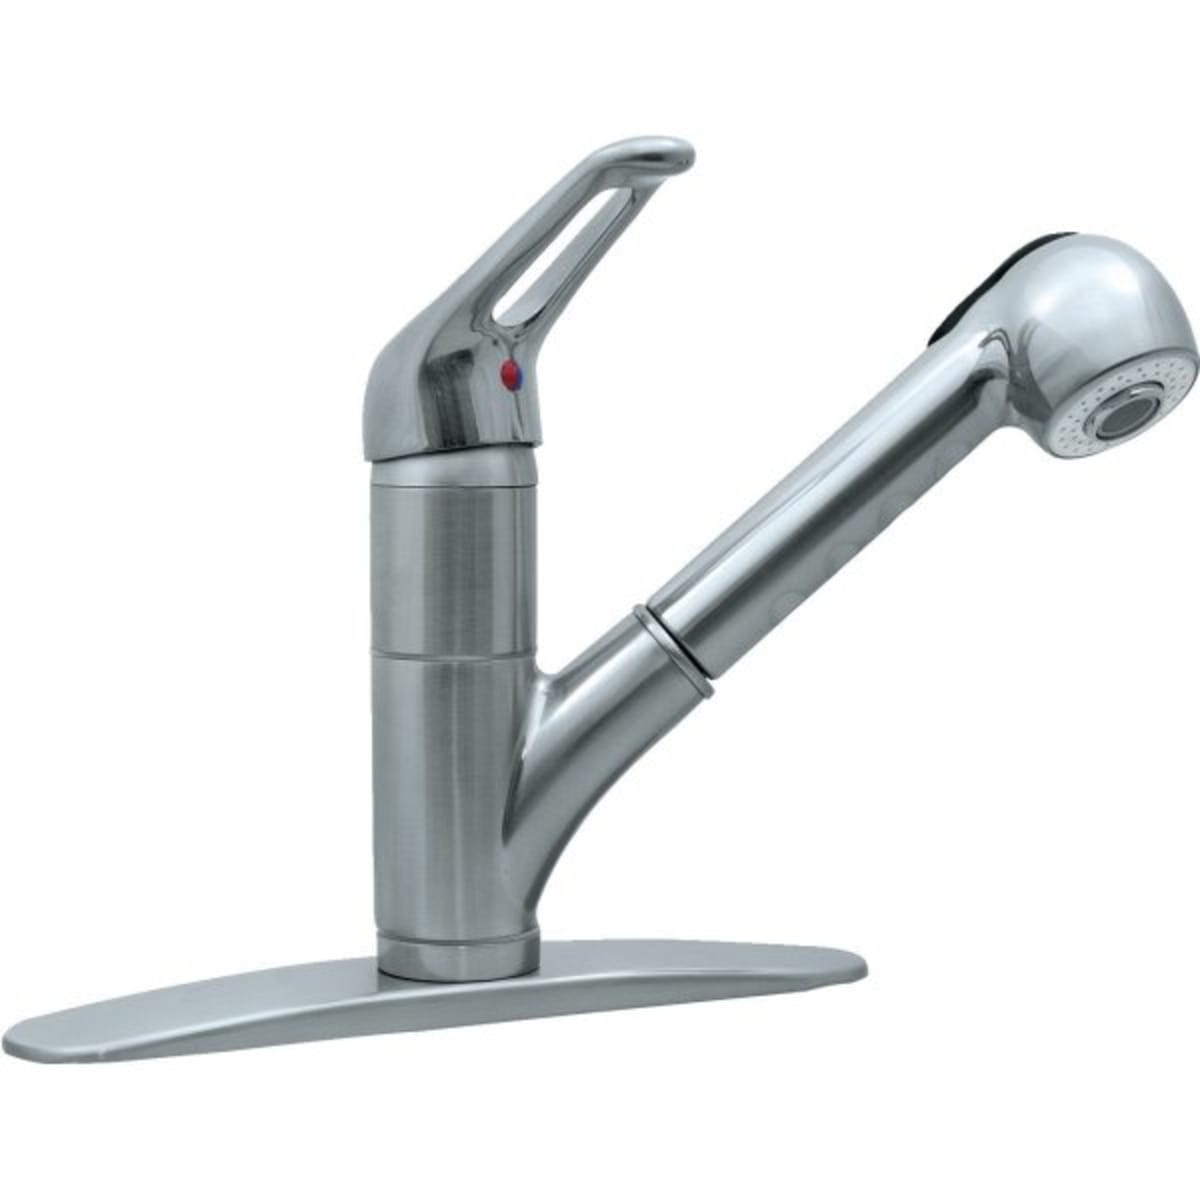 Howard Berger Aquaplumb Premium Pull Out Kitchen Faucet 2 2 Gpm